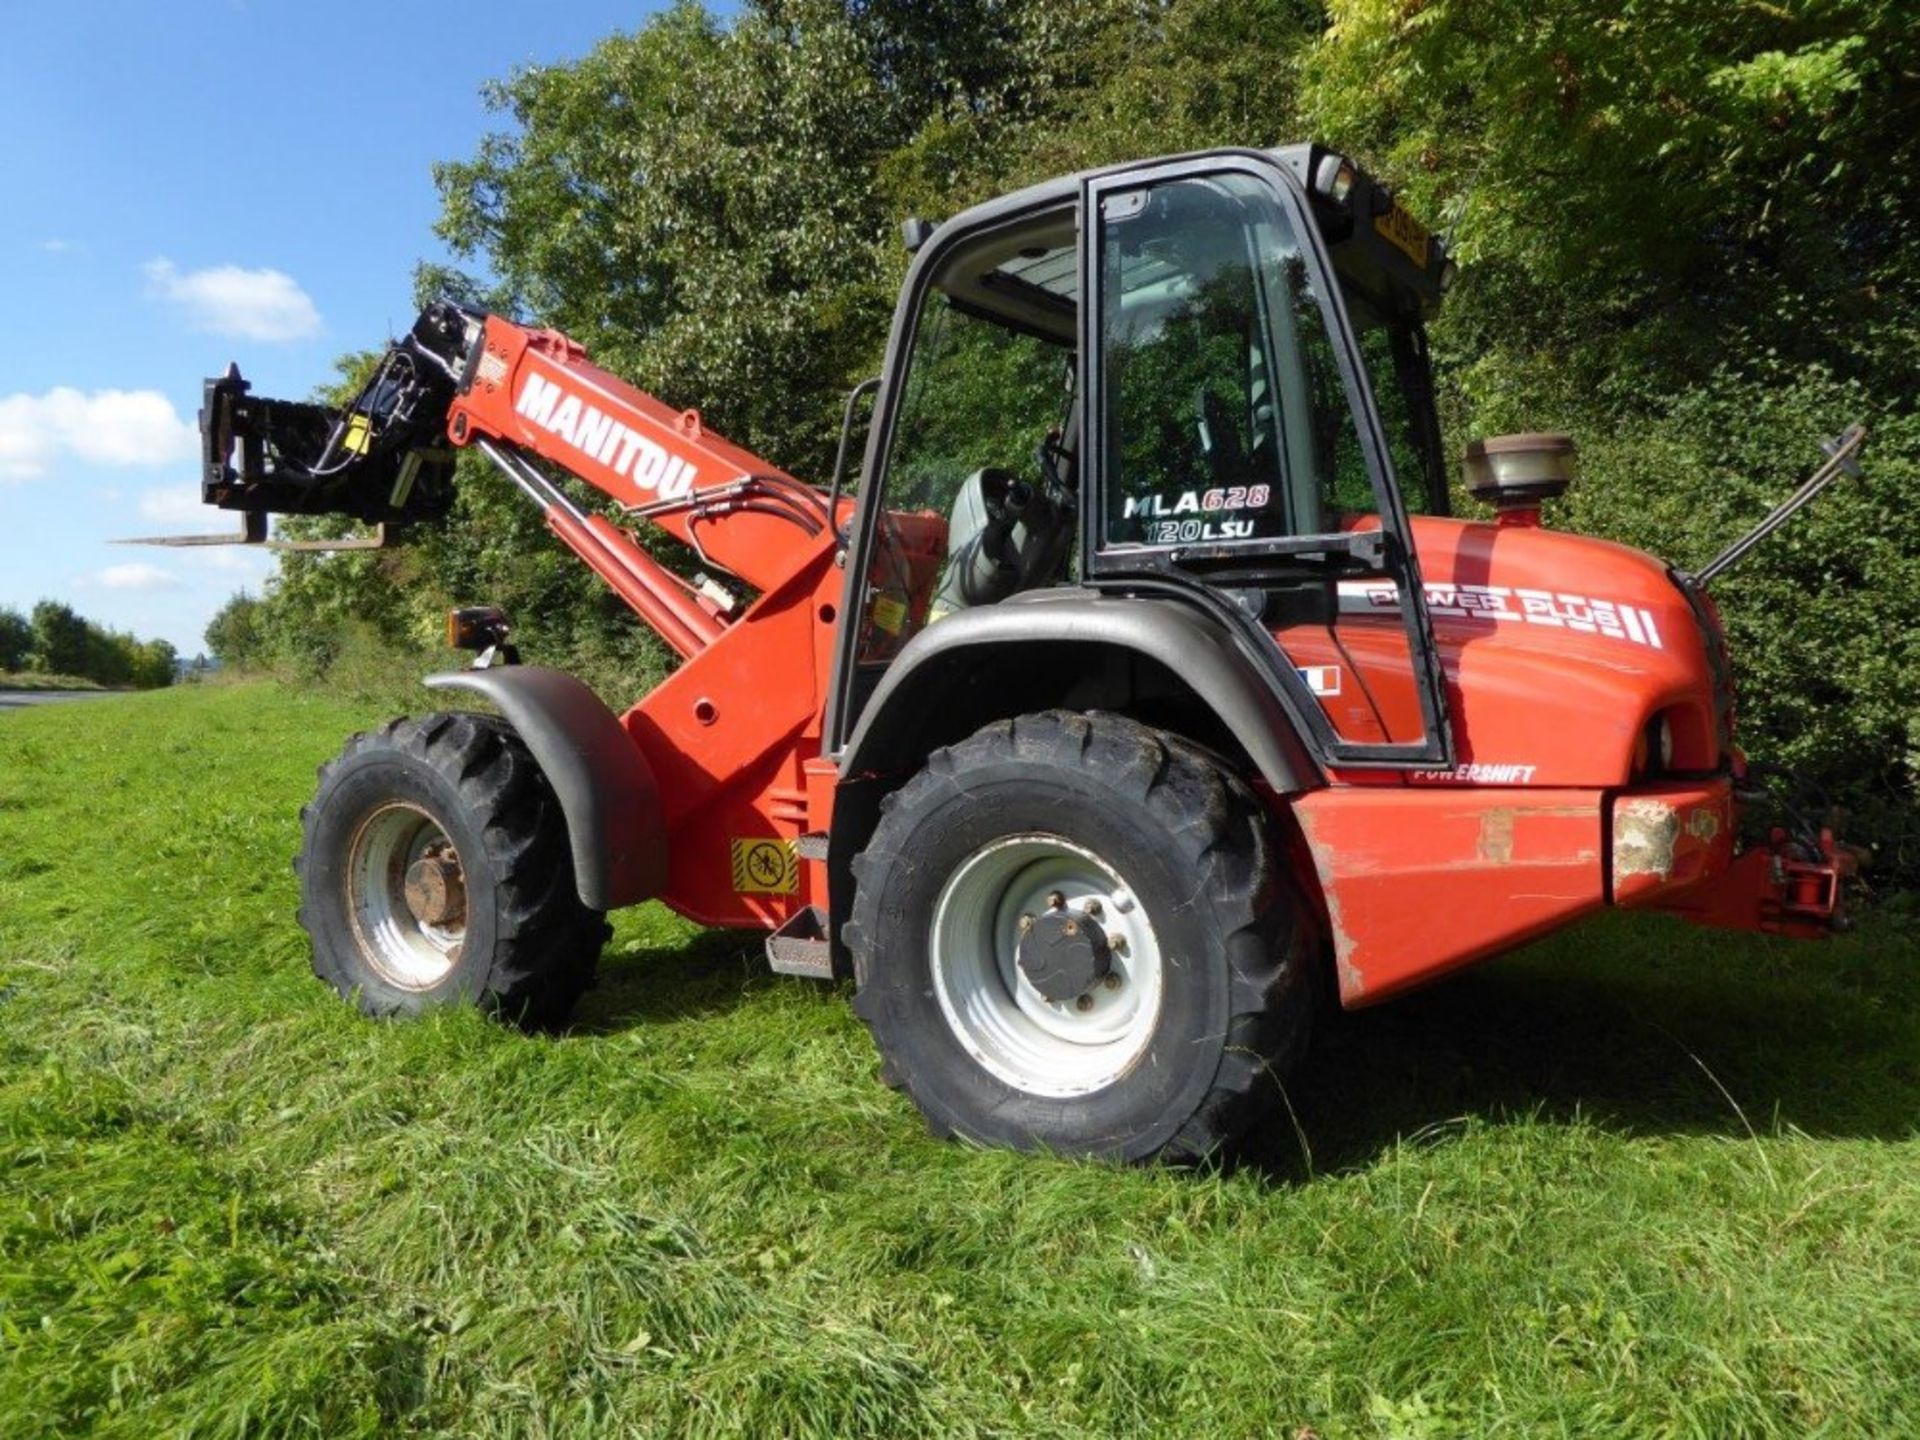 2009 Manitou Maniscopic MLA 628 LSU CRC Powershift, with Pallet Forks, one owner from new - Image 2 of 6